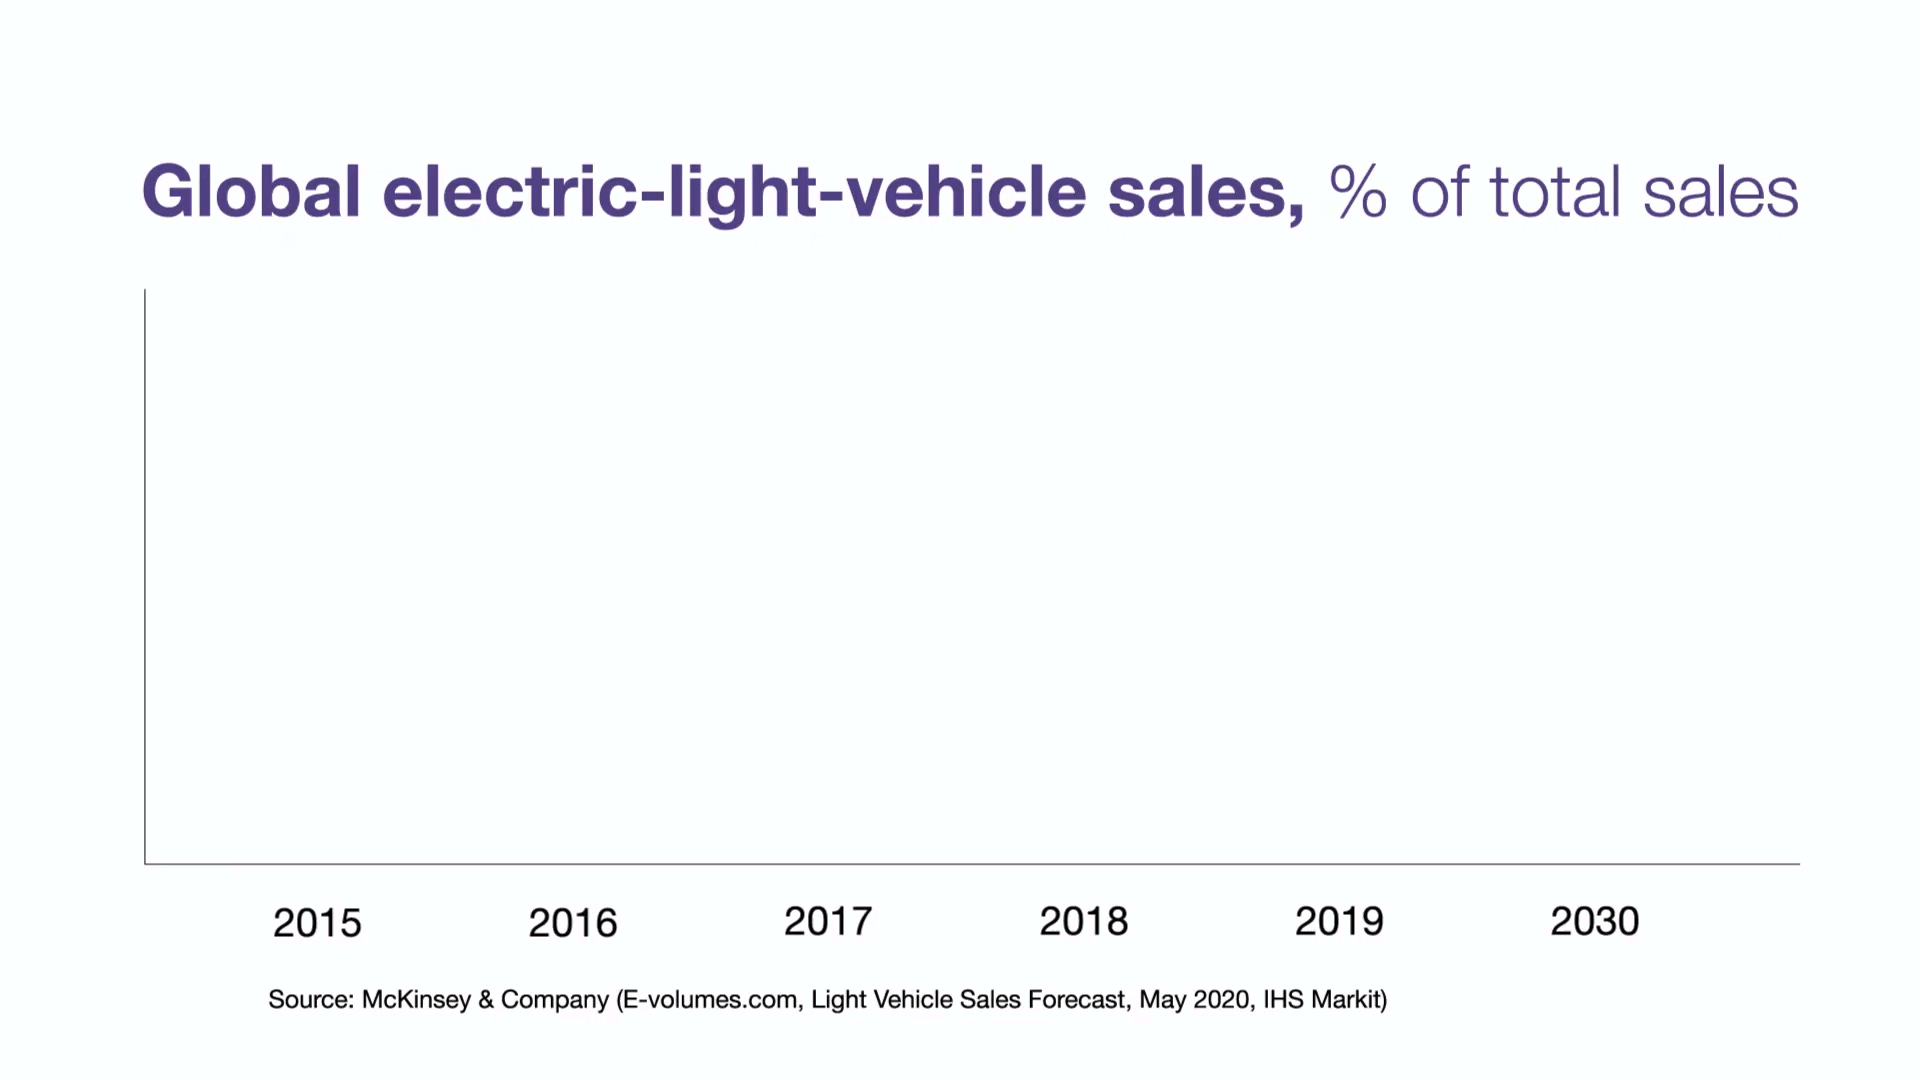 Column chart showing the % of total global electric-light-vehicle sales projected to 2030